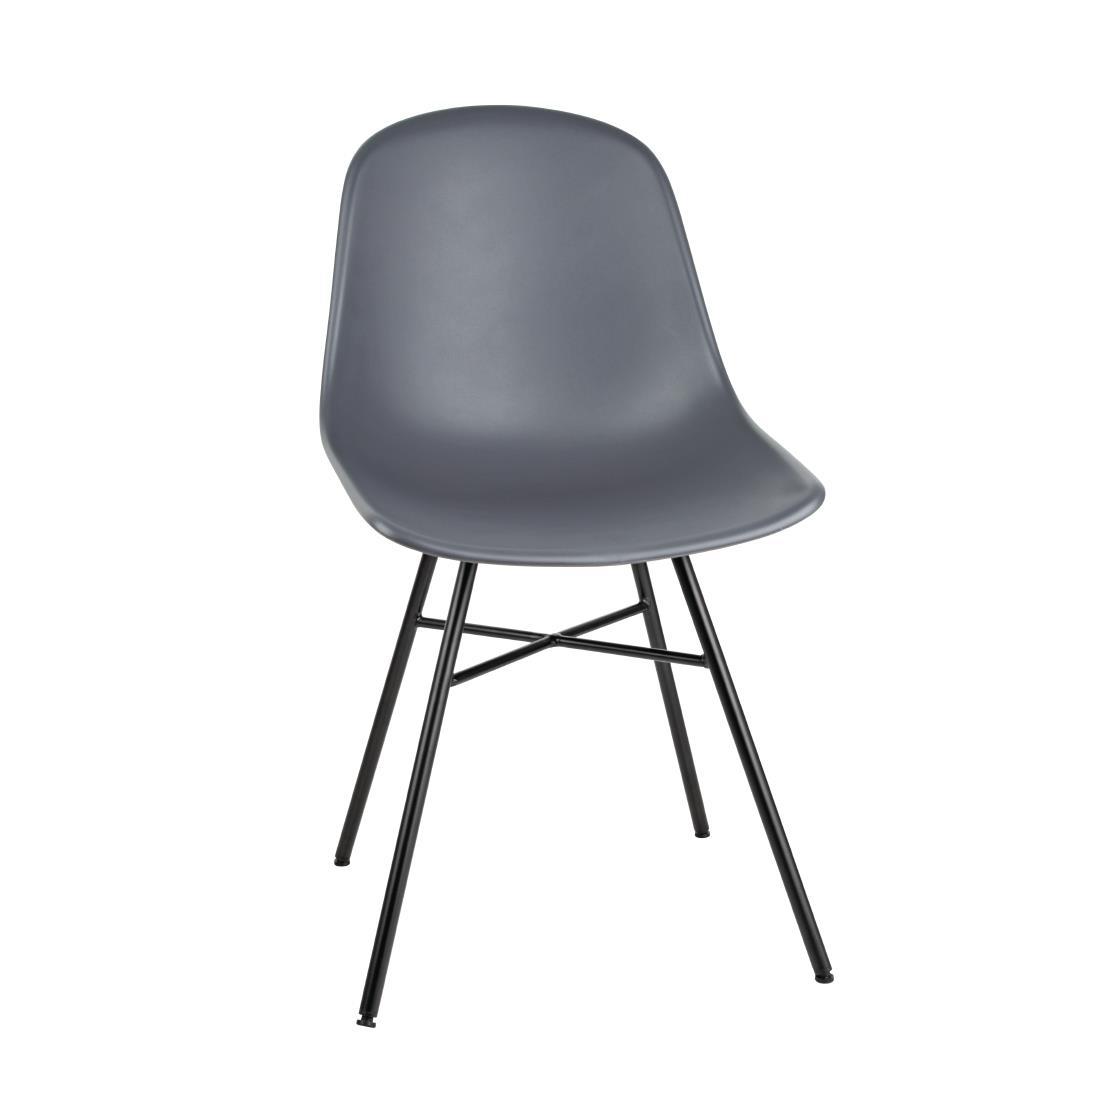 Bolero Arlo Side Chairs with Metal Frame Charcoal (Pack of 2) - DY347  - 1